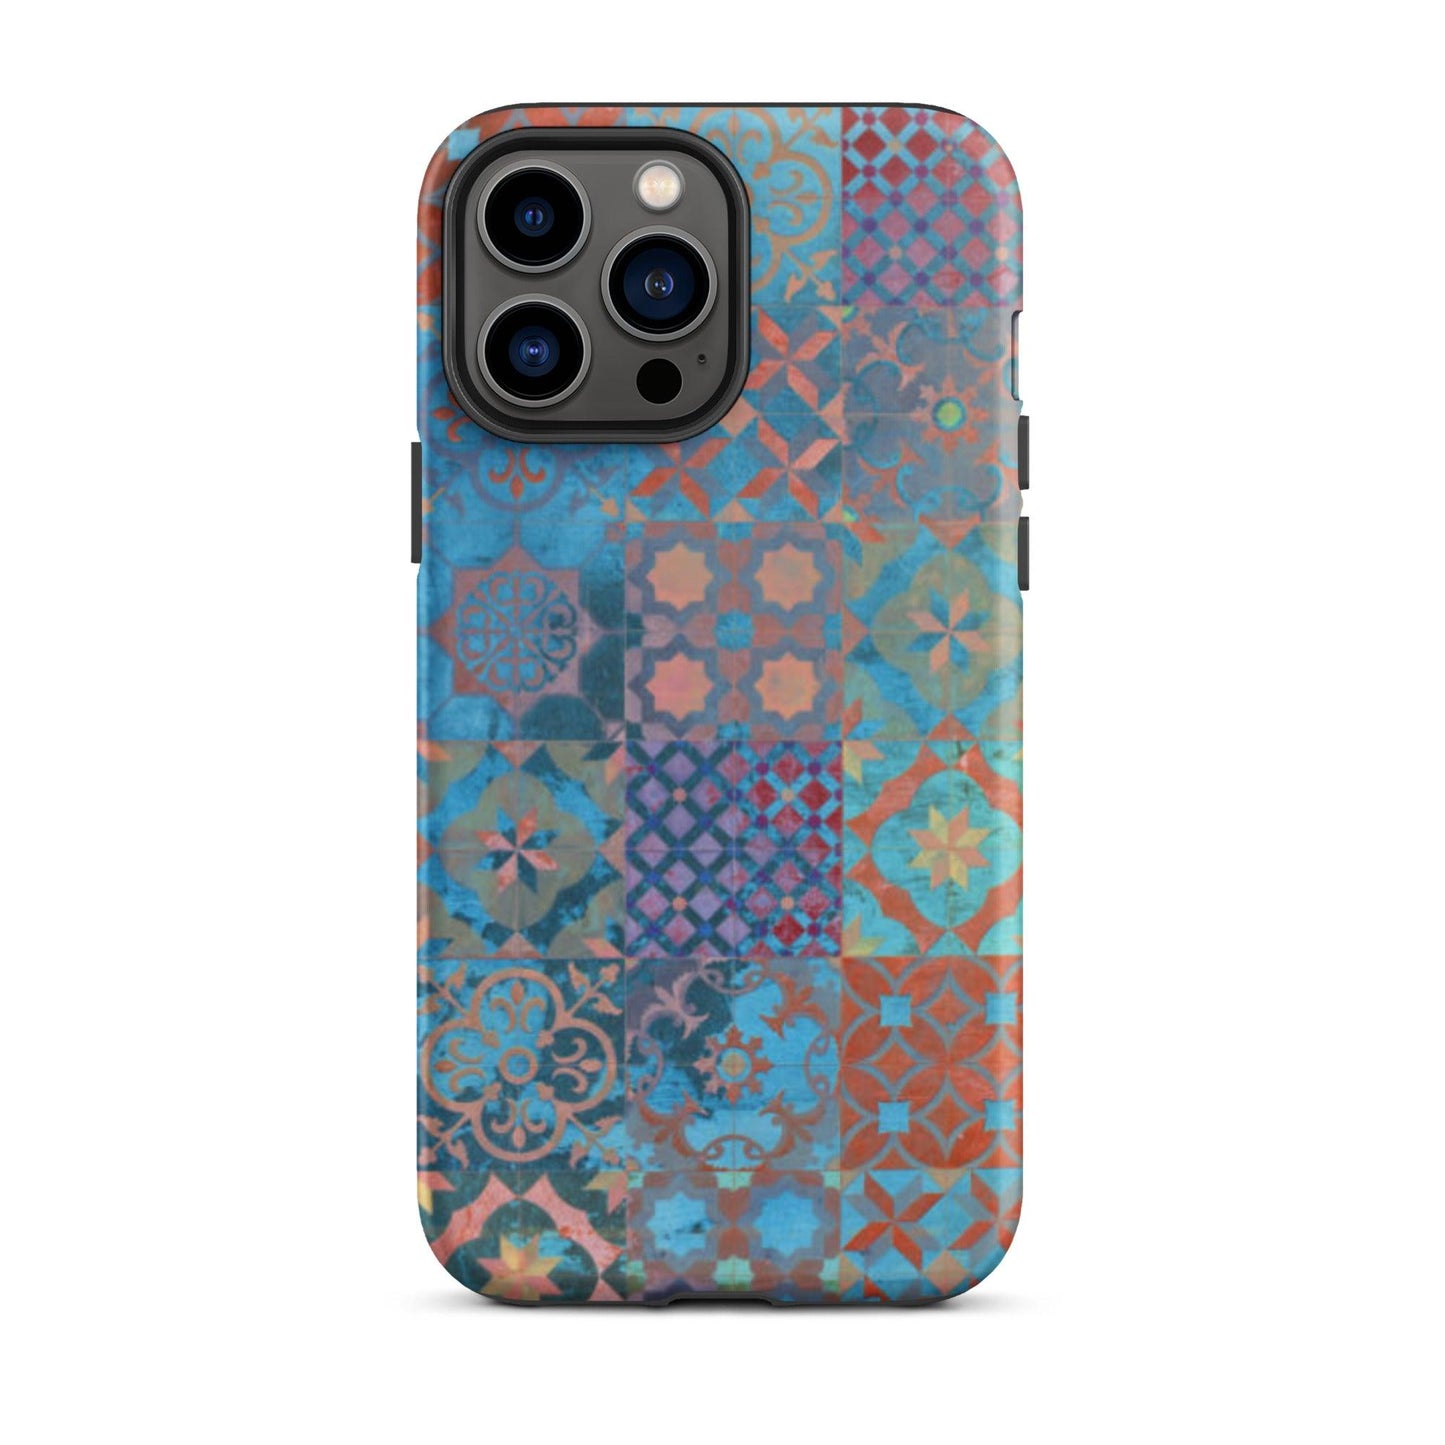 Moroccan Tile Tough iPhone Case - The Global Wanderer